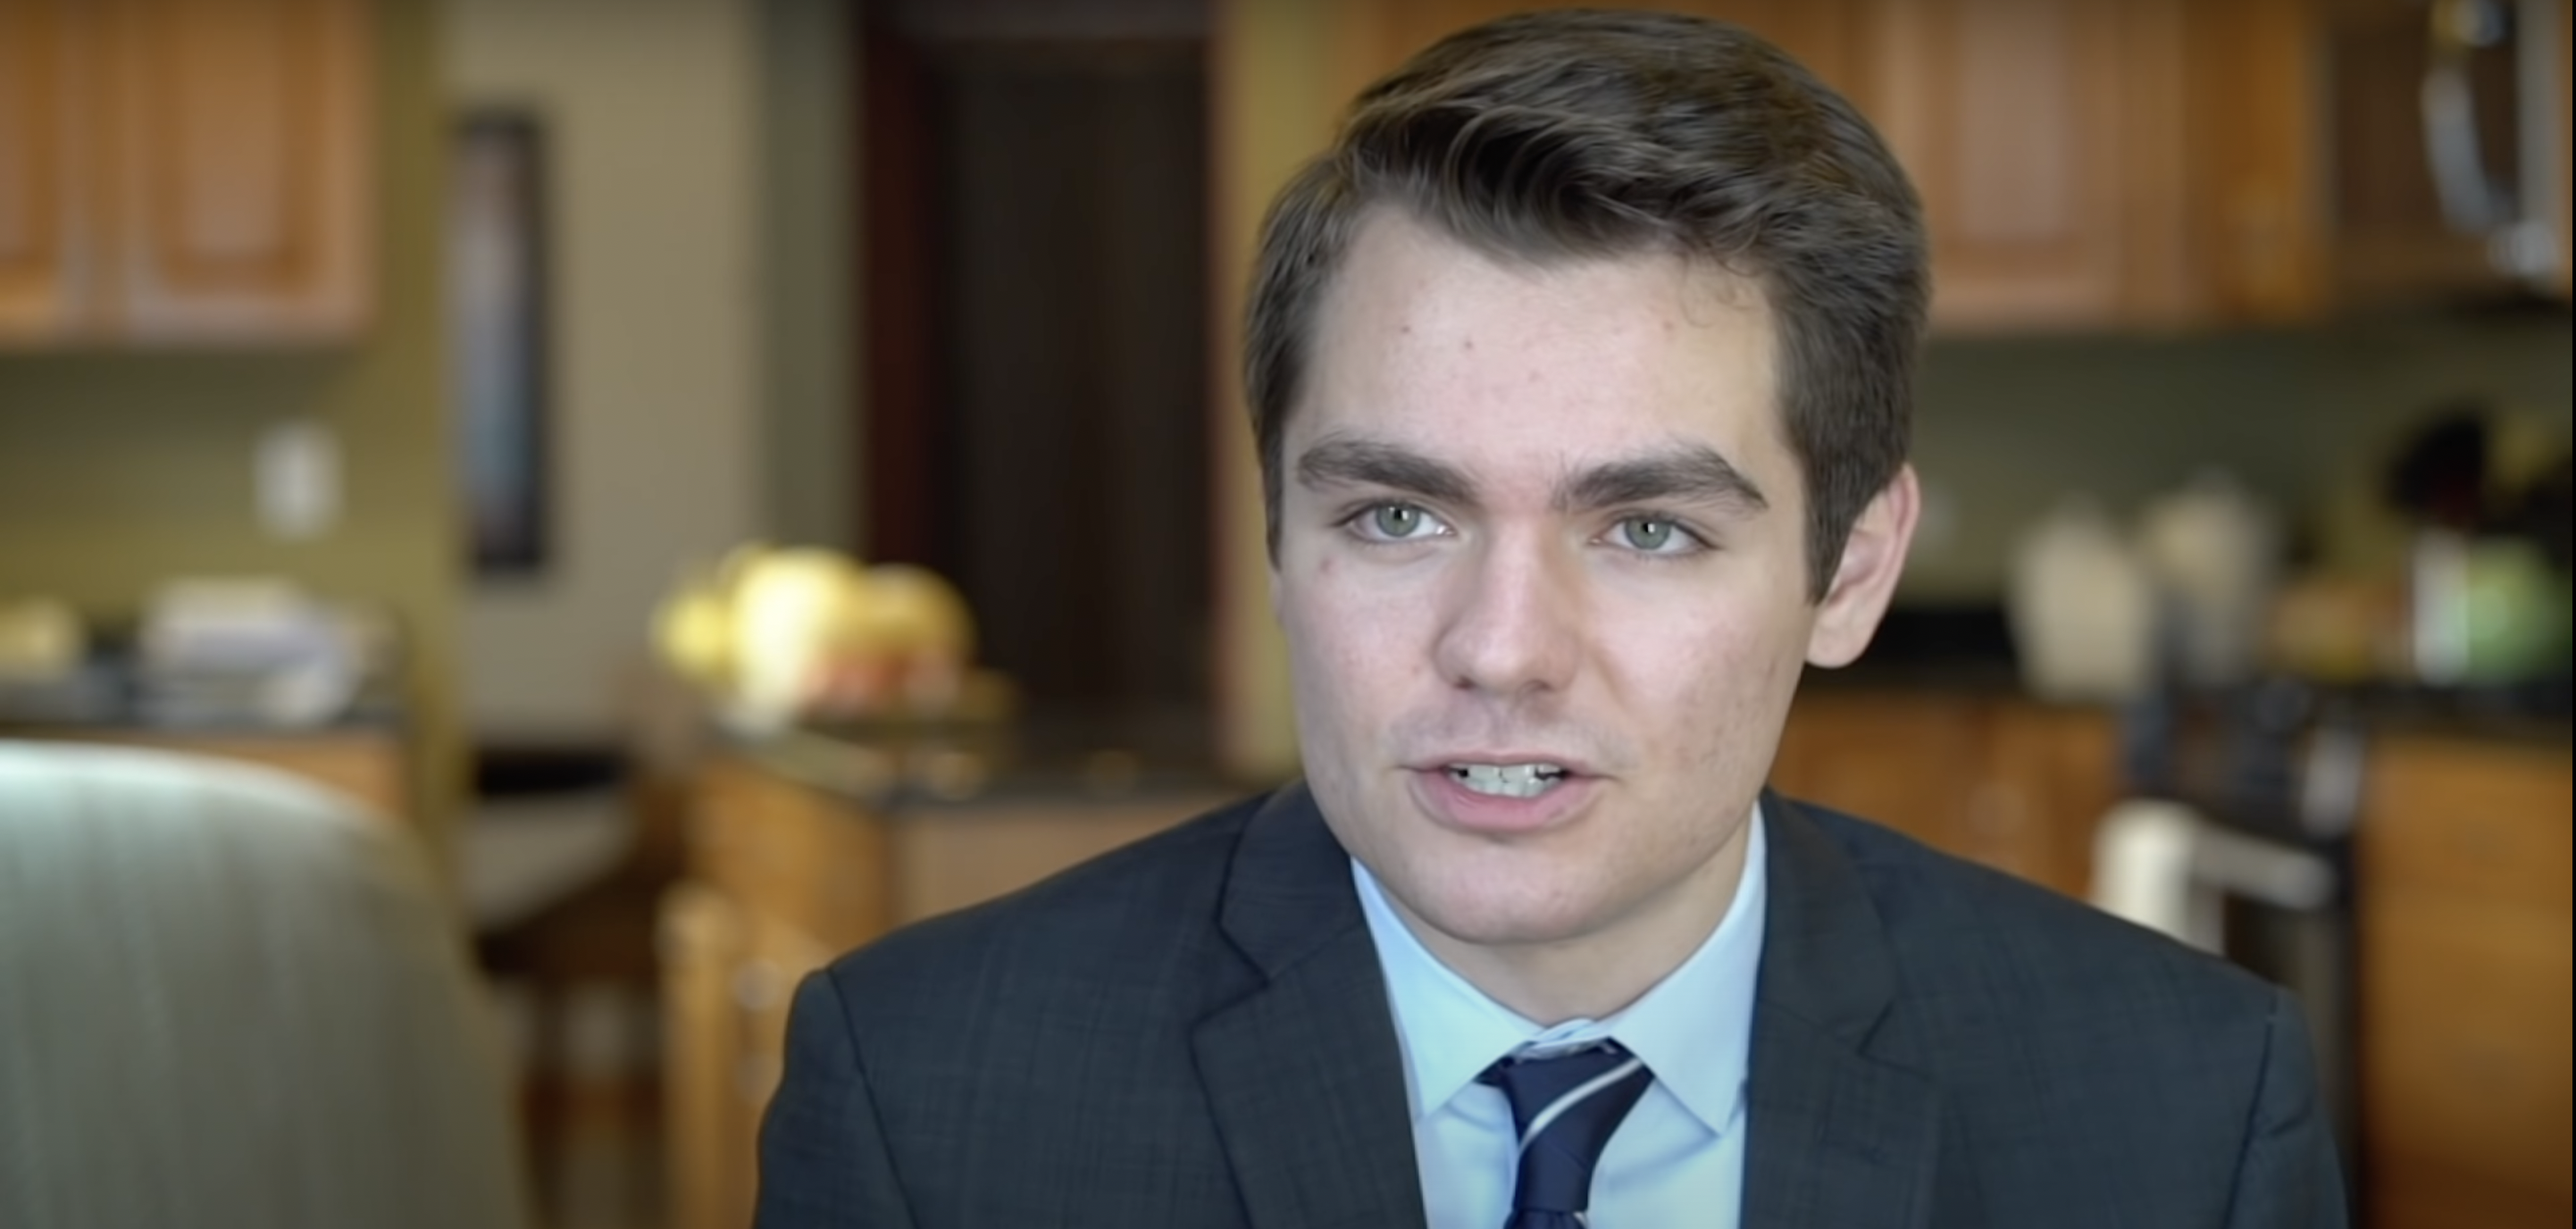 A young white man, Nick Fuentes, in a suit